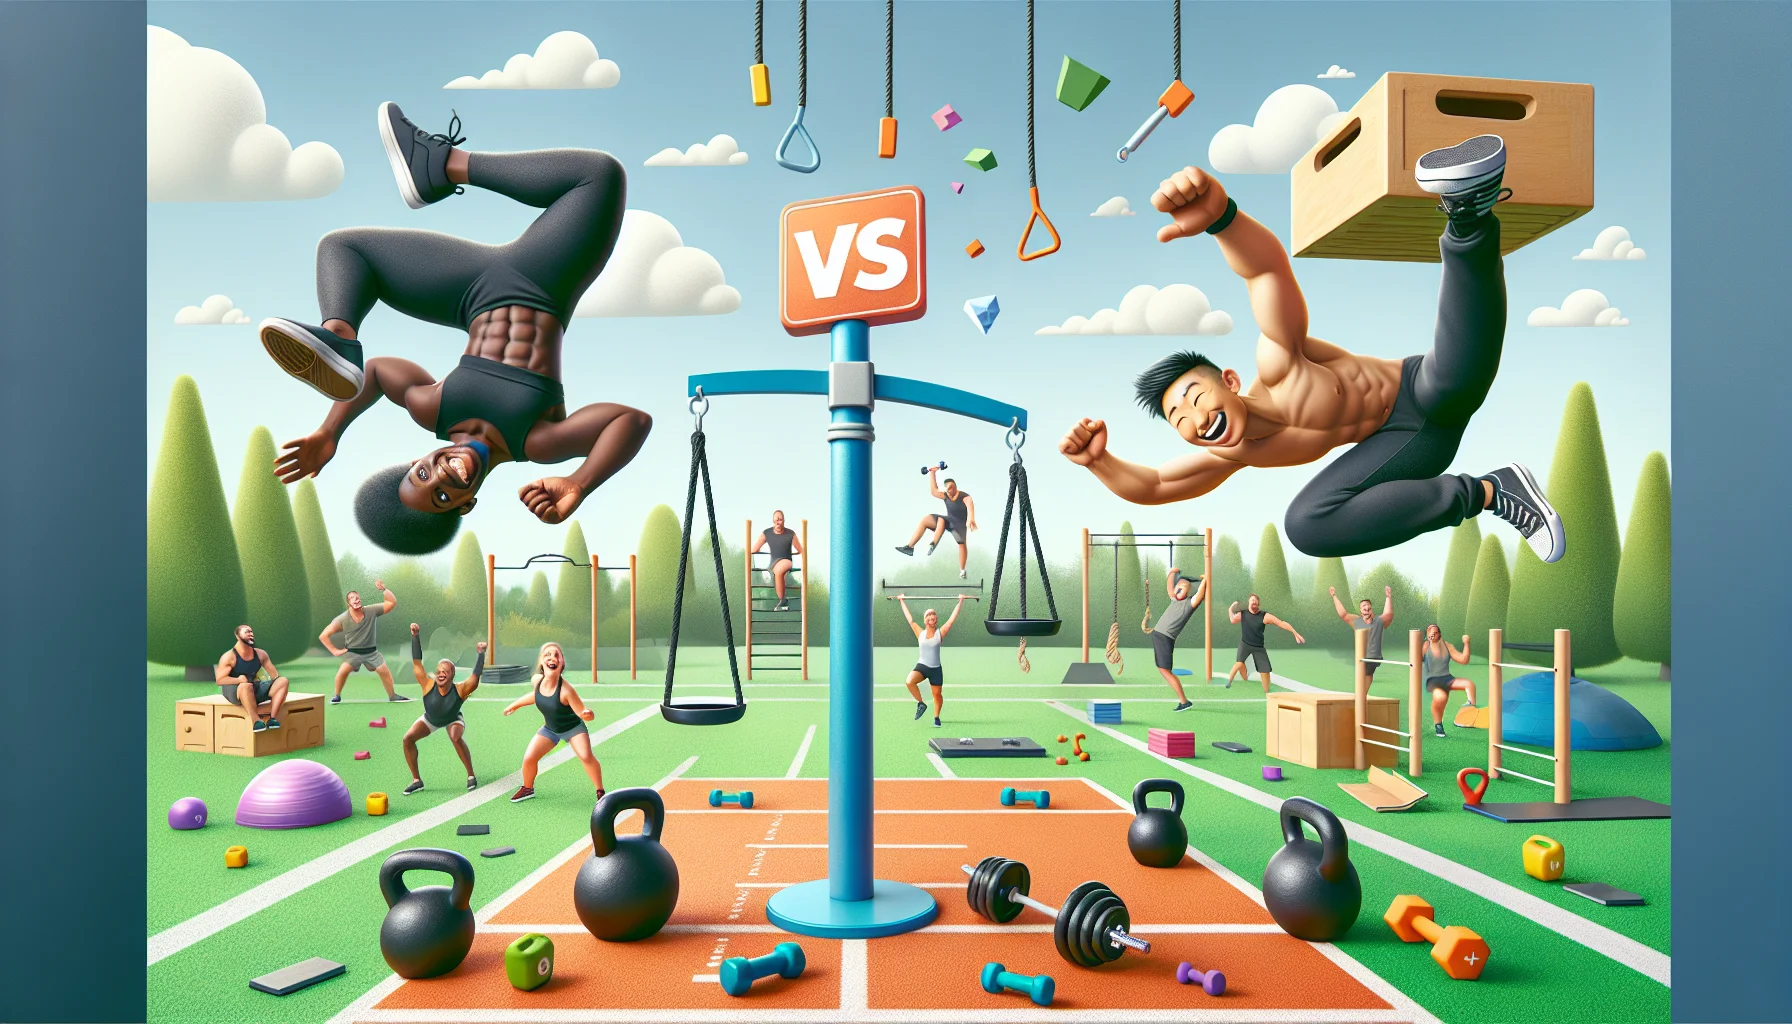 Imagine an entertaining and humorous scene promoting exercise. On one side, there's a Black female athlete demonstrating calisthenics, effortlessly doing handstands and pull-ups with a big smile on her face. On the other side, there's an Asian male athlete, equally cheerful, lifting heavy kettlebells and jumping on boxes representing CrossFit. They're both in an open, vibrant and welcoming park setting with neatly arranged exercise equipment. In between them is a comically large scale decorated with fitness symbols. The 'vs' sign floats humorously in the sky, symbolizing the friendly competition.